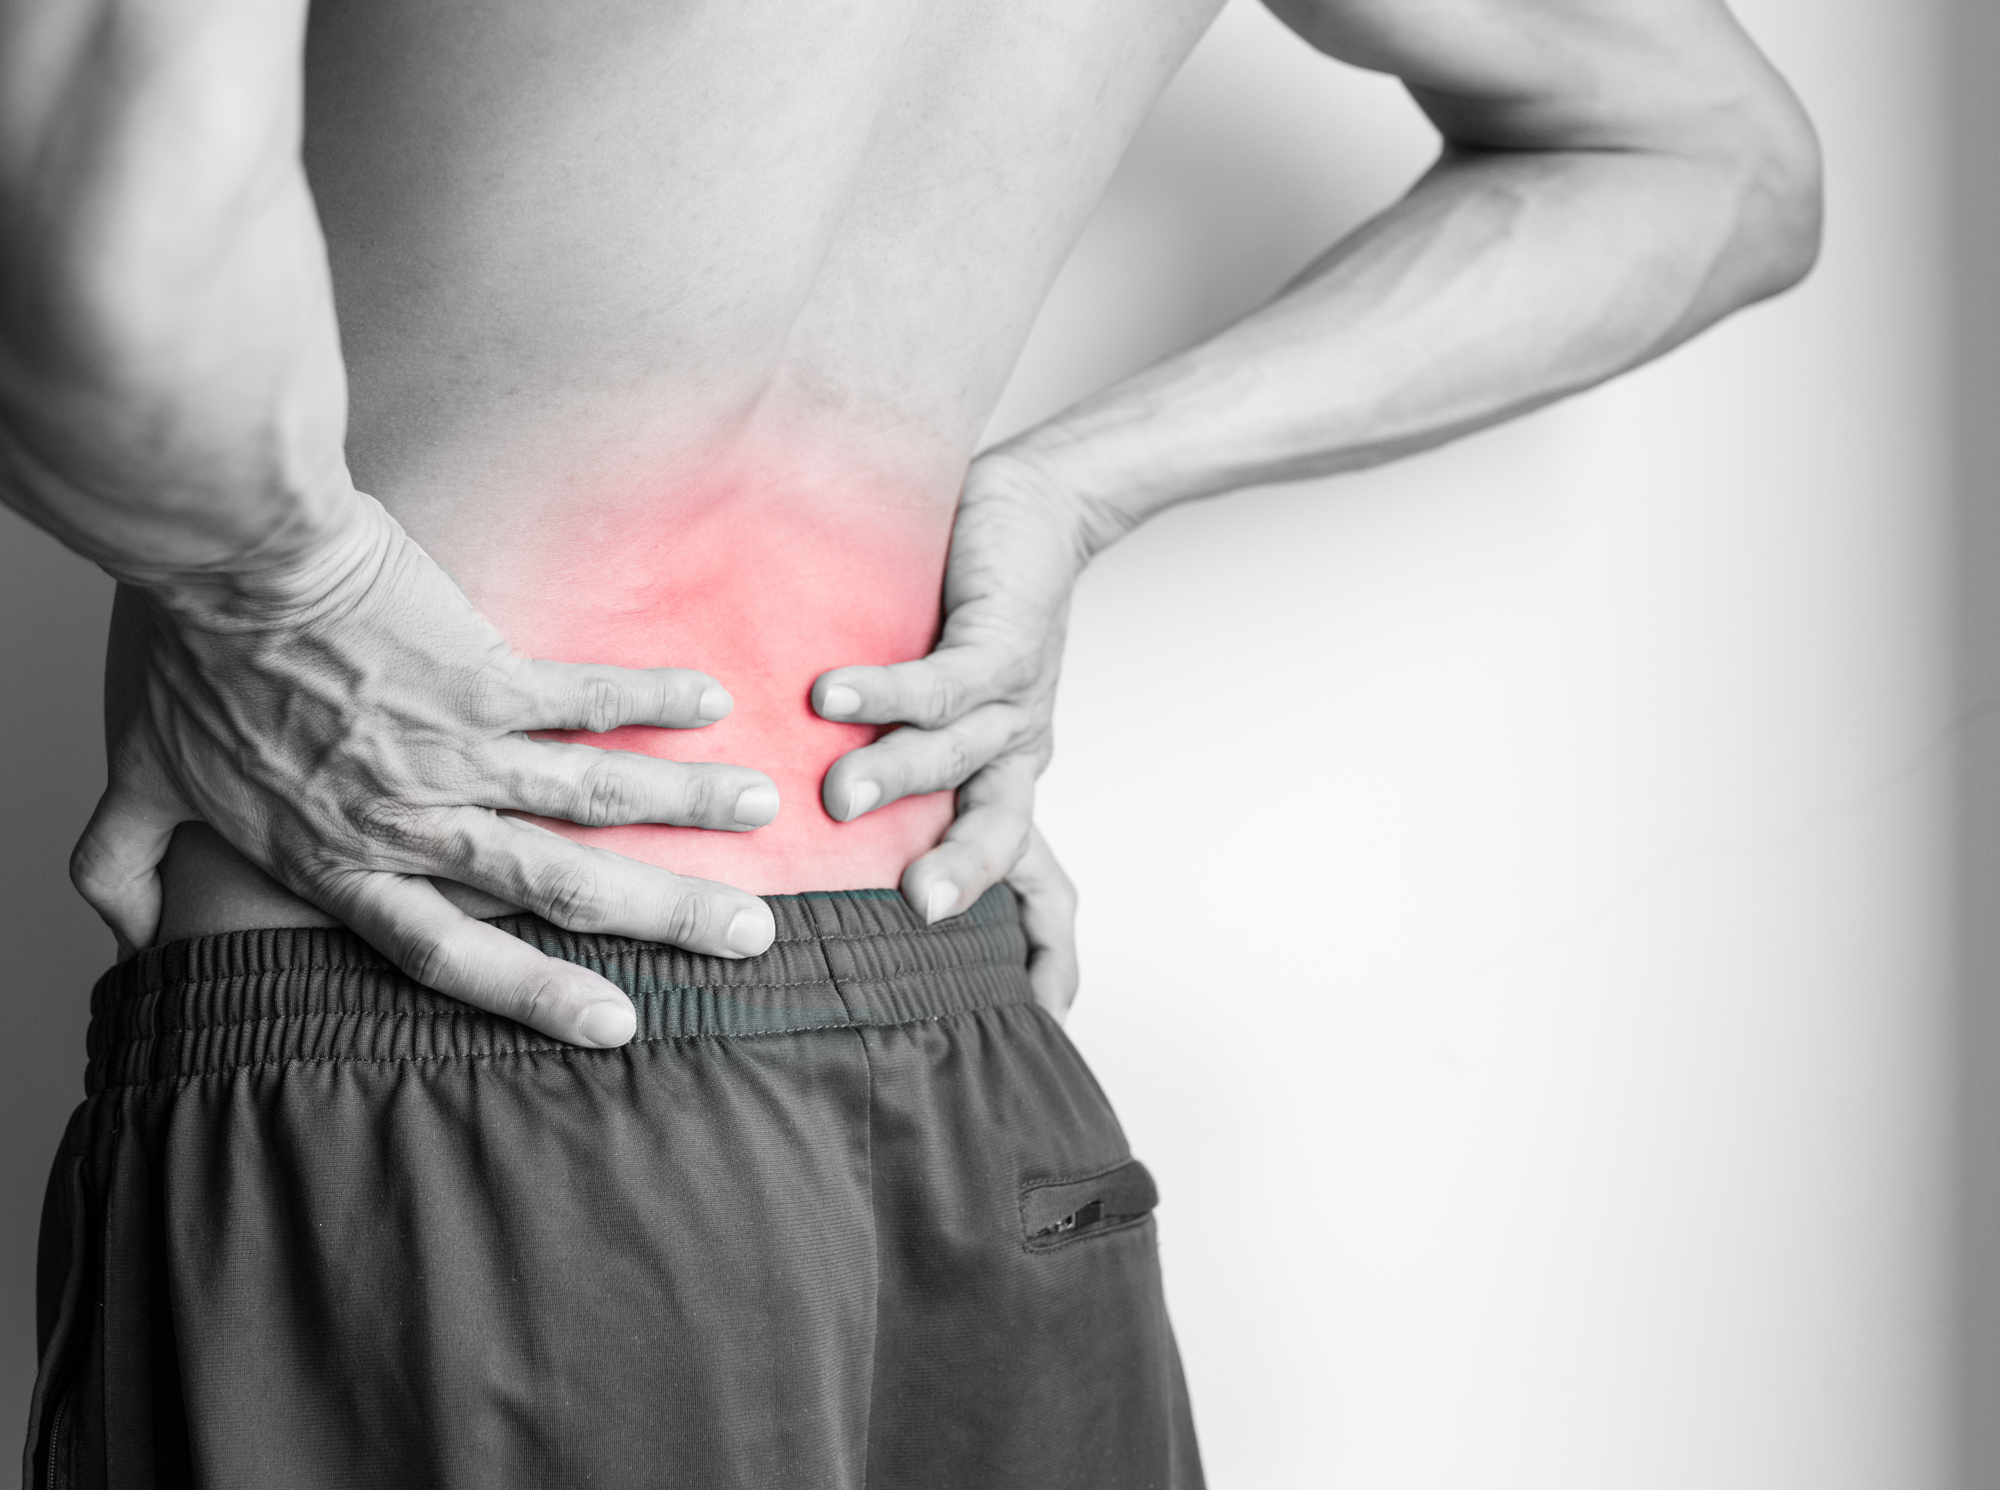 What Causes Low Back Pain?